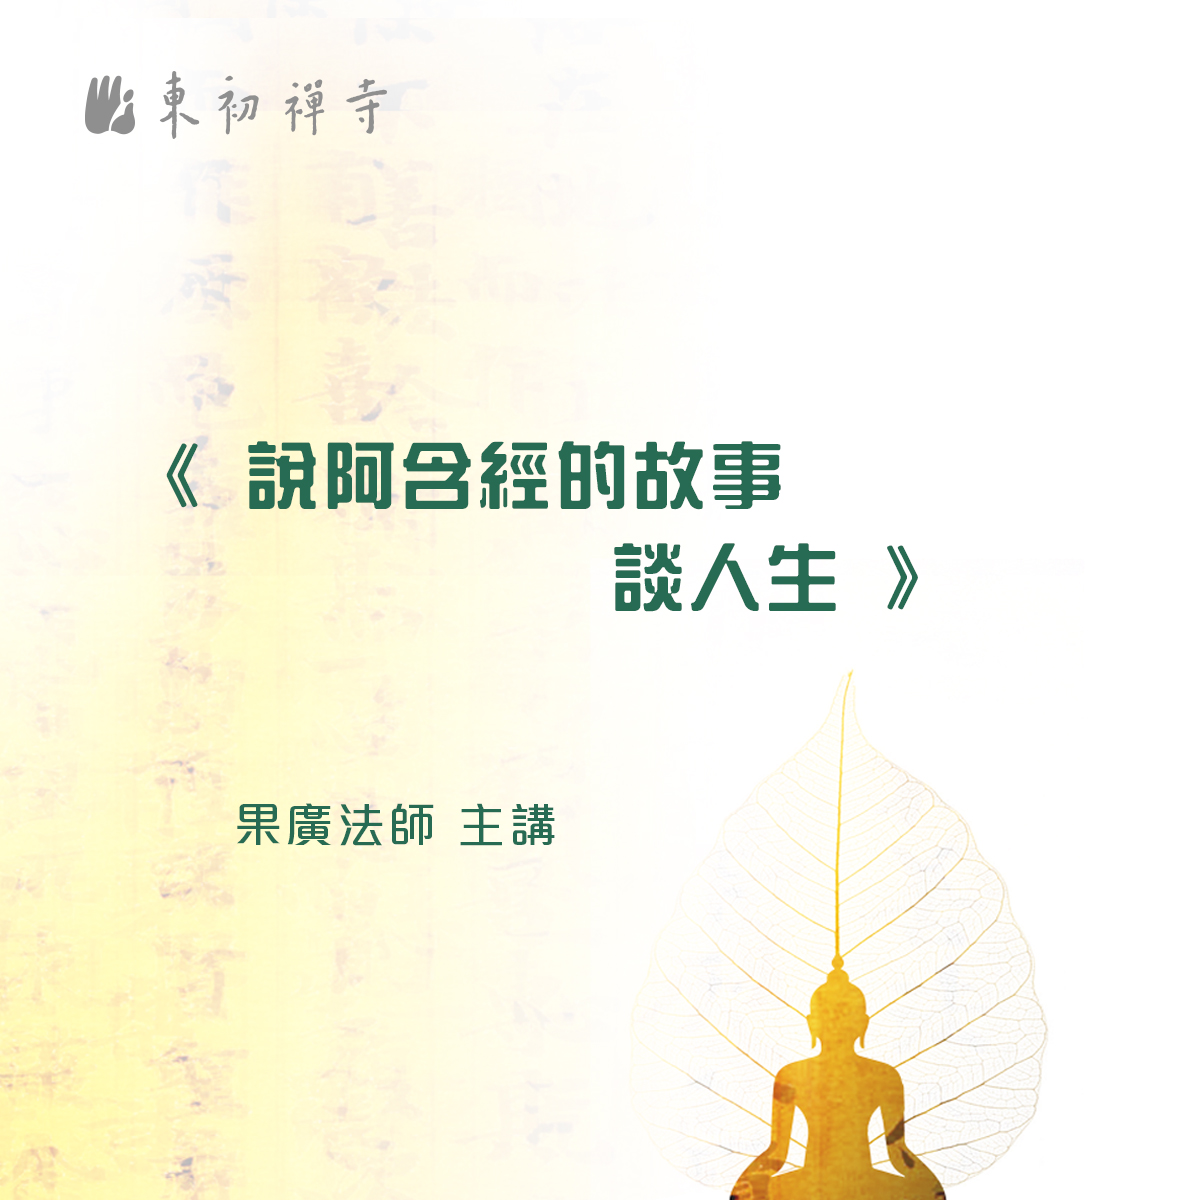 (In Chinese)-Online Chinese Dharma Class -<br />
【The Stories from the Agama Sutra】